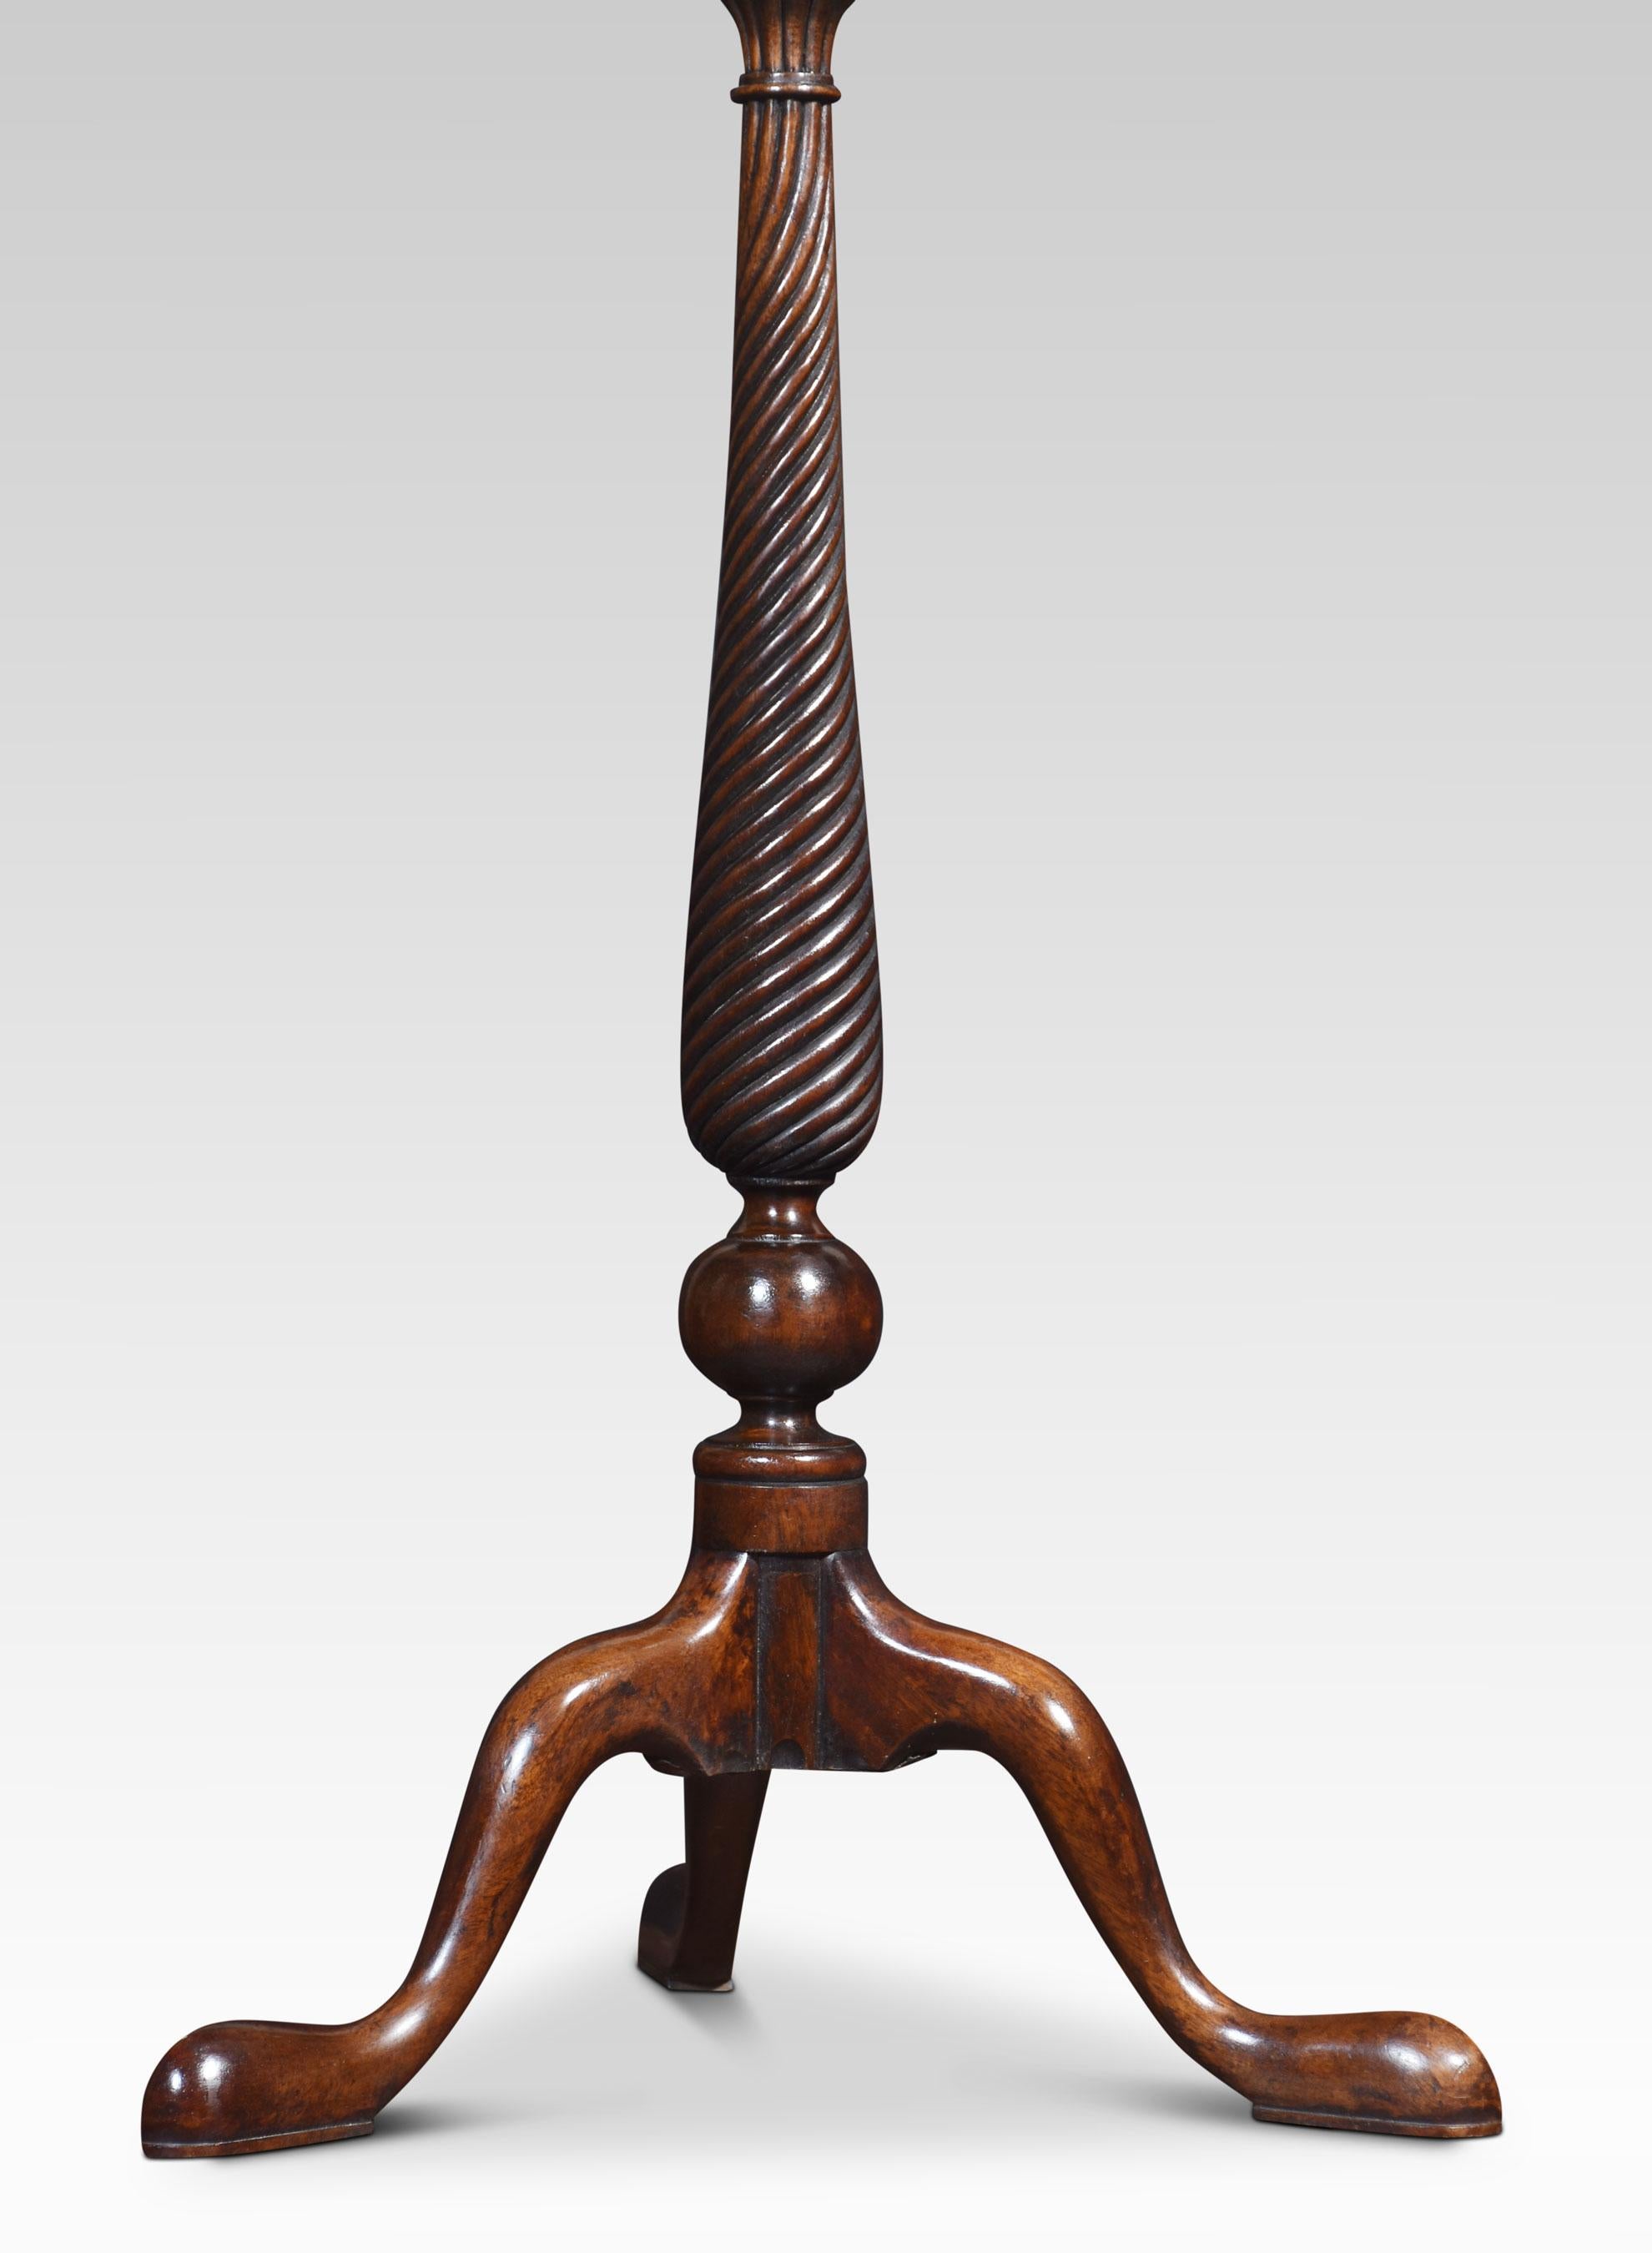 Pair of tall mahogany lamp tables, the circular tops above spiral carved columns, raised up on slender supports terminating in pad feet.
Dimensions
Height 35.5 Inches
Width 19.5 Inches
Depth 19.5 Inches

Diameter of top 11.5 Inches